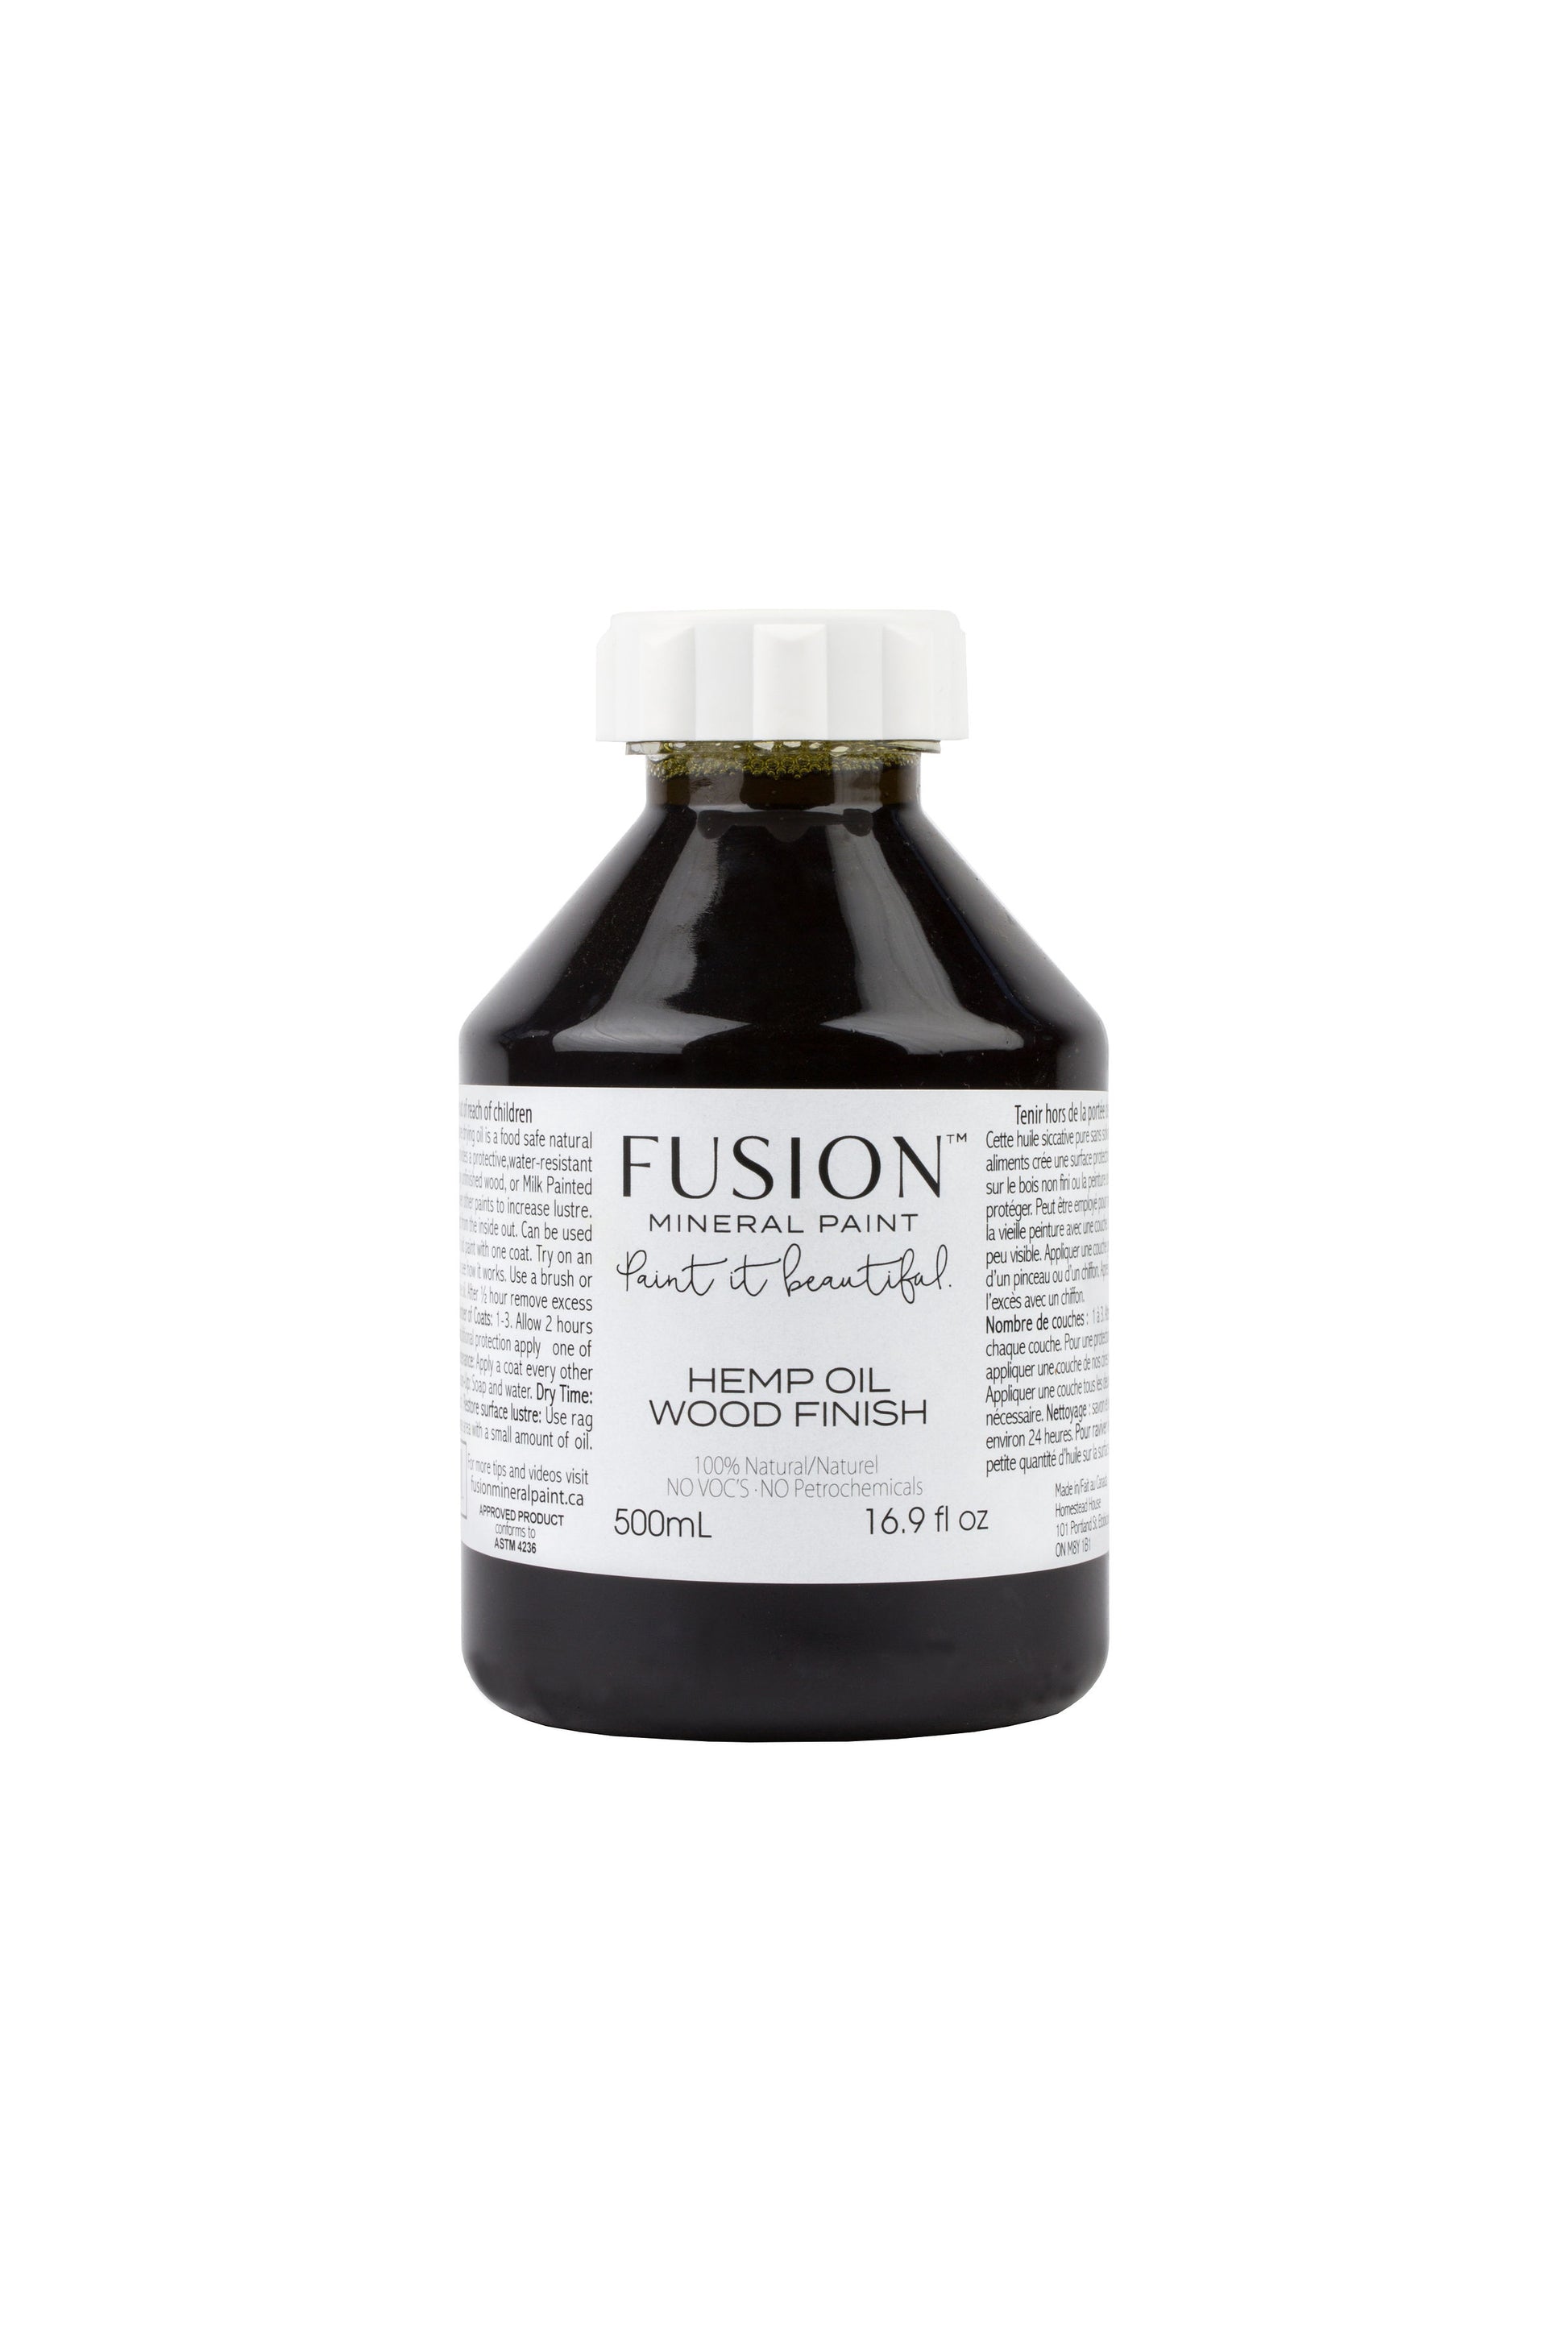 Hemp Oil Fusion Mineral Paint, Top Coat Protection | 500 ml Pint Size, Old to New Furniture & Decor